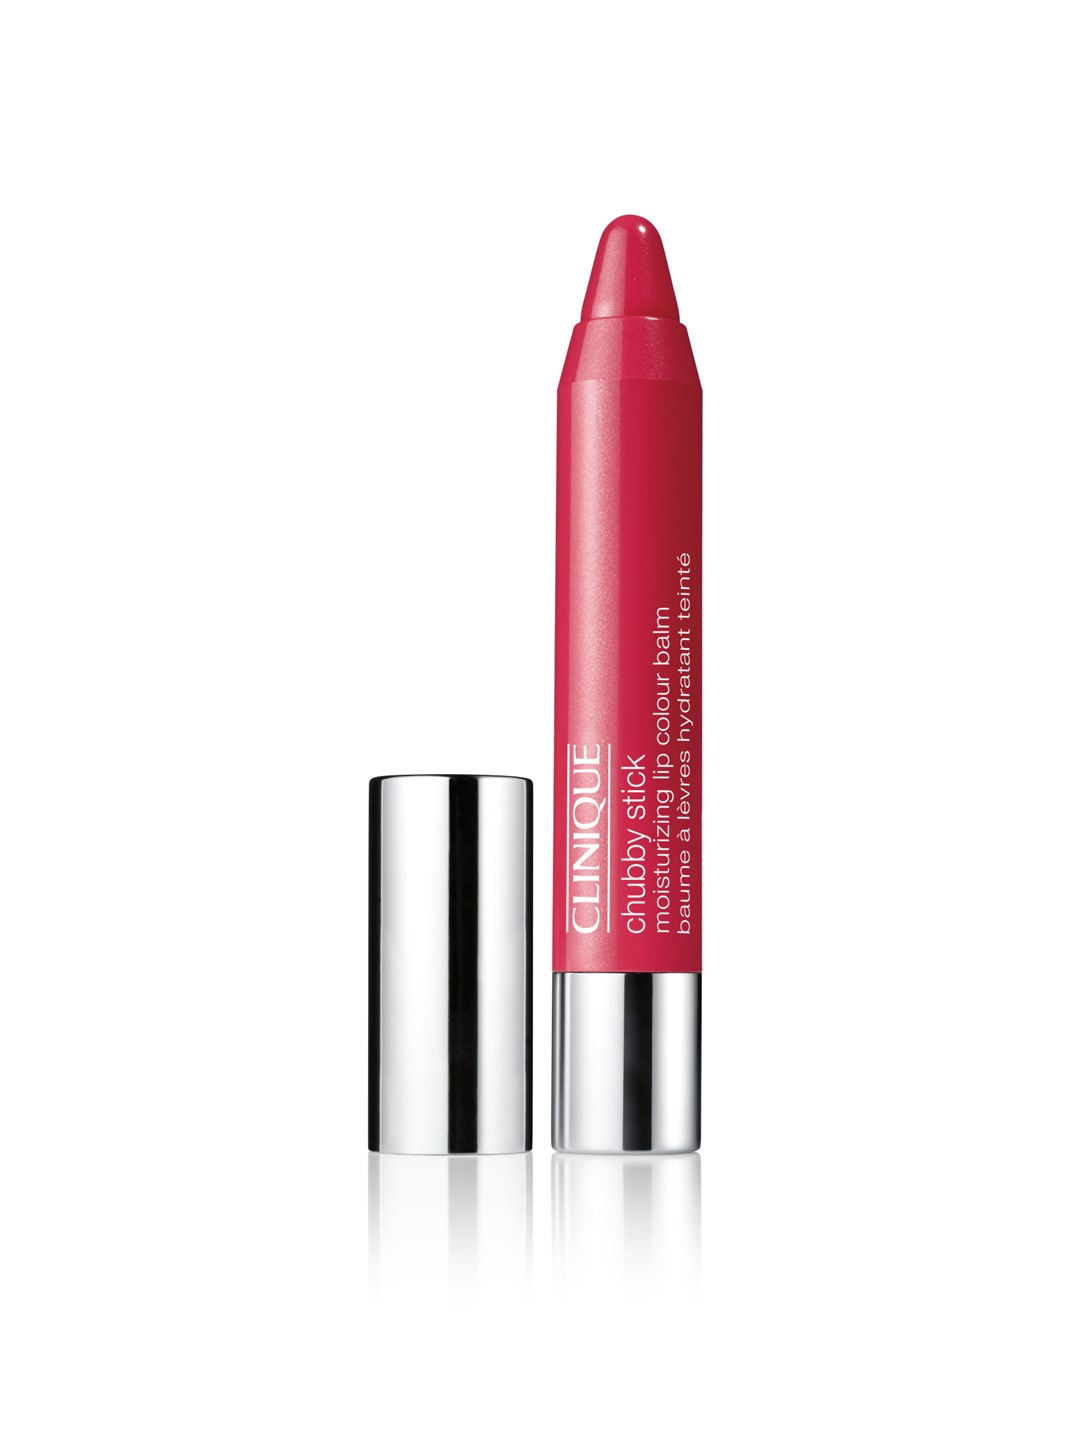 Clinique Chubby Stick Moisturizing Lip Colour Balm - Chunky Cherry A78 3g Price in India